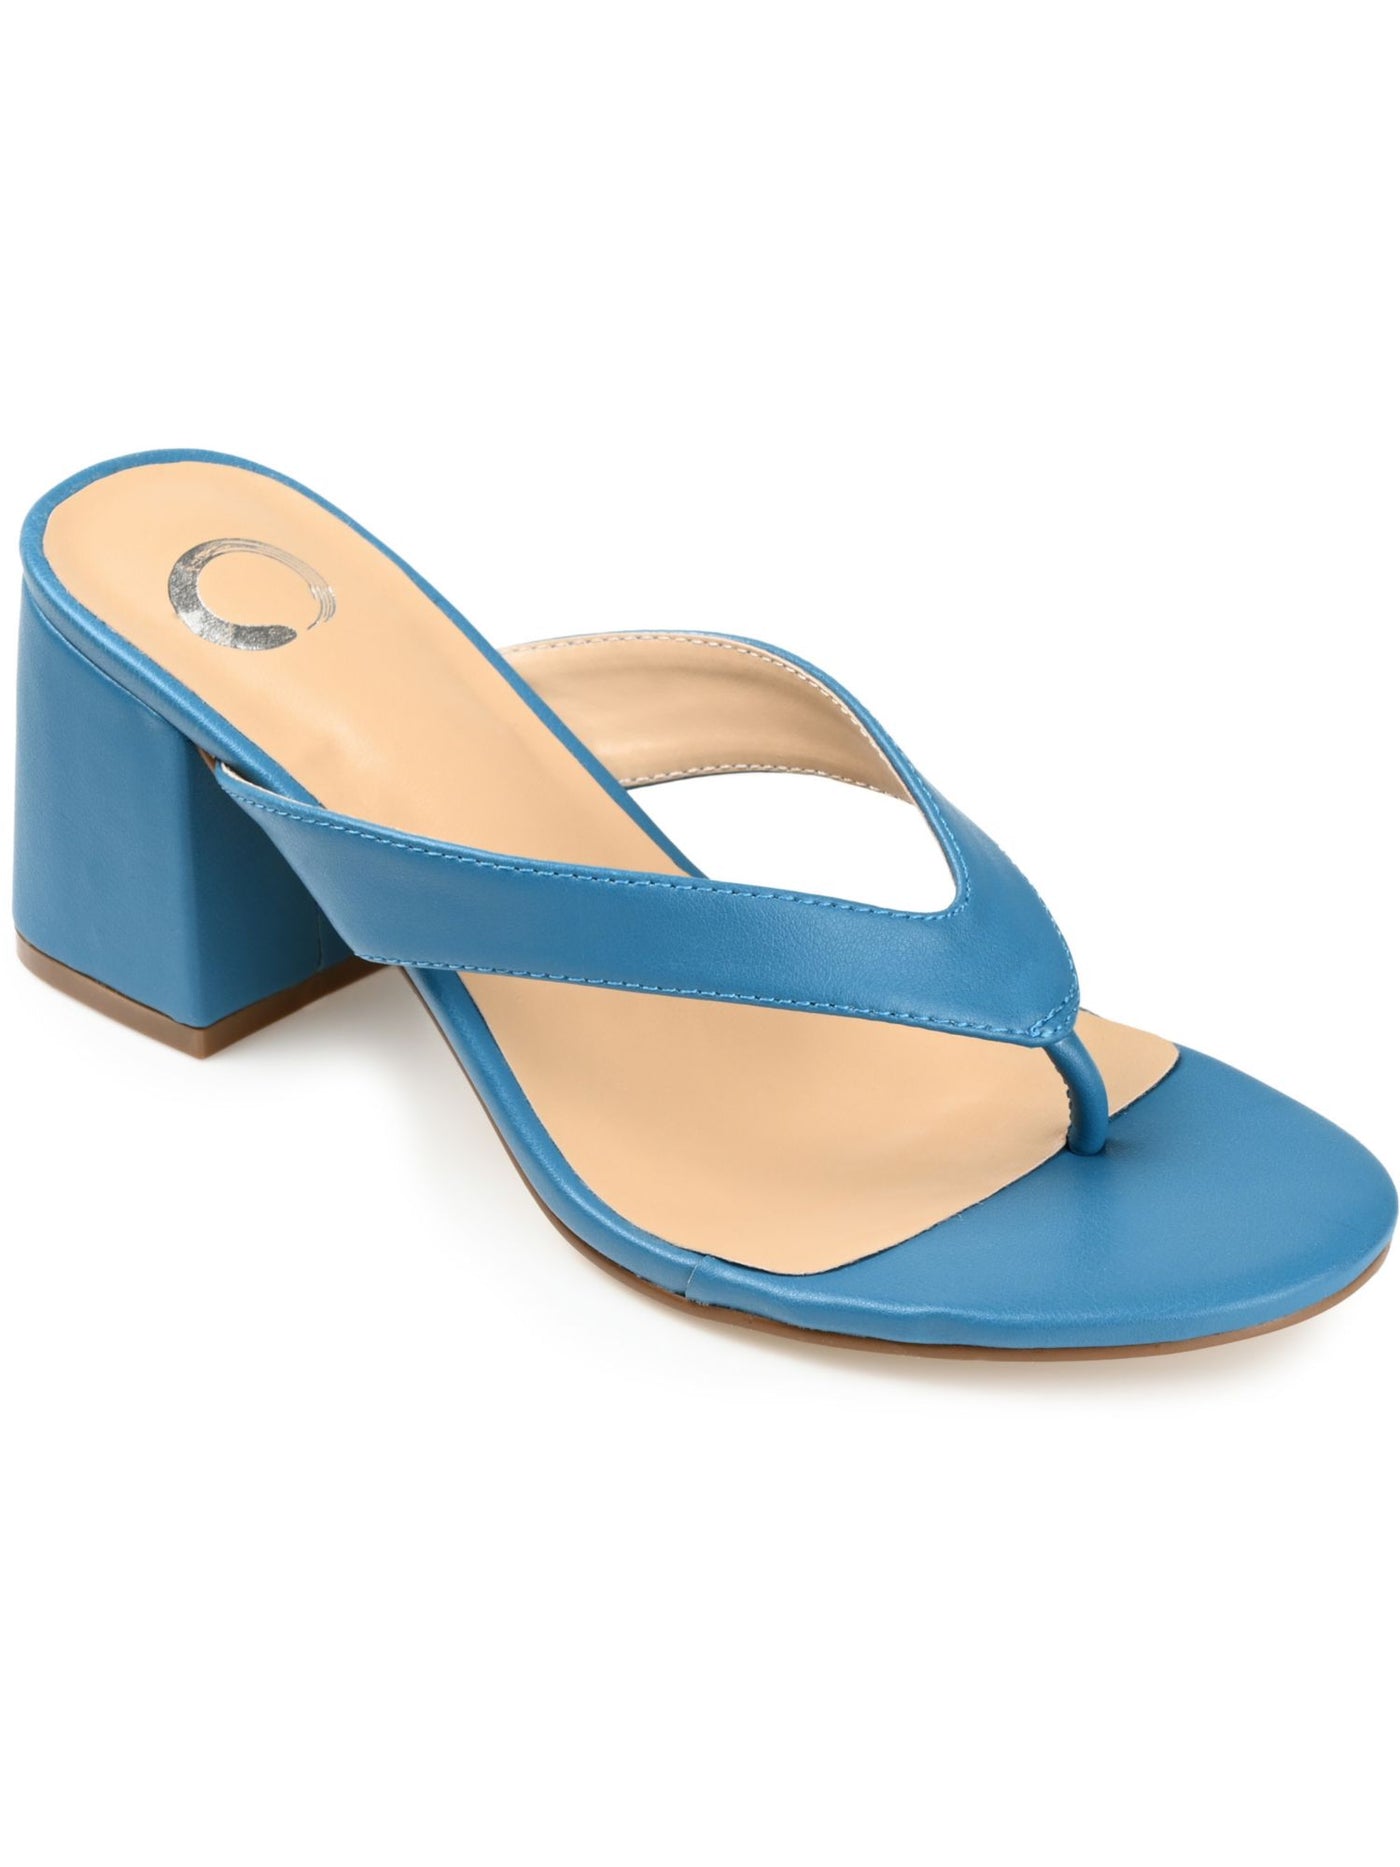 JOURNEE COLLECTION Womens Blue Padded Alika Open Toe Block Heel Slip On Thong Sandals Shoes 8